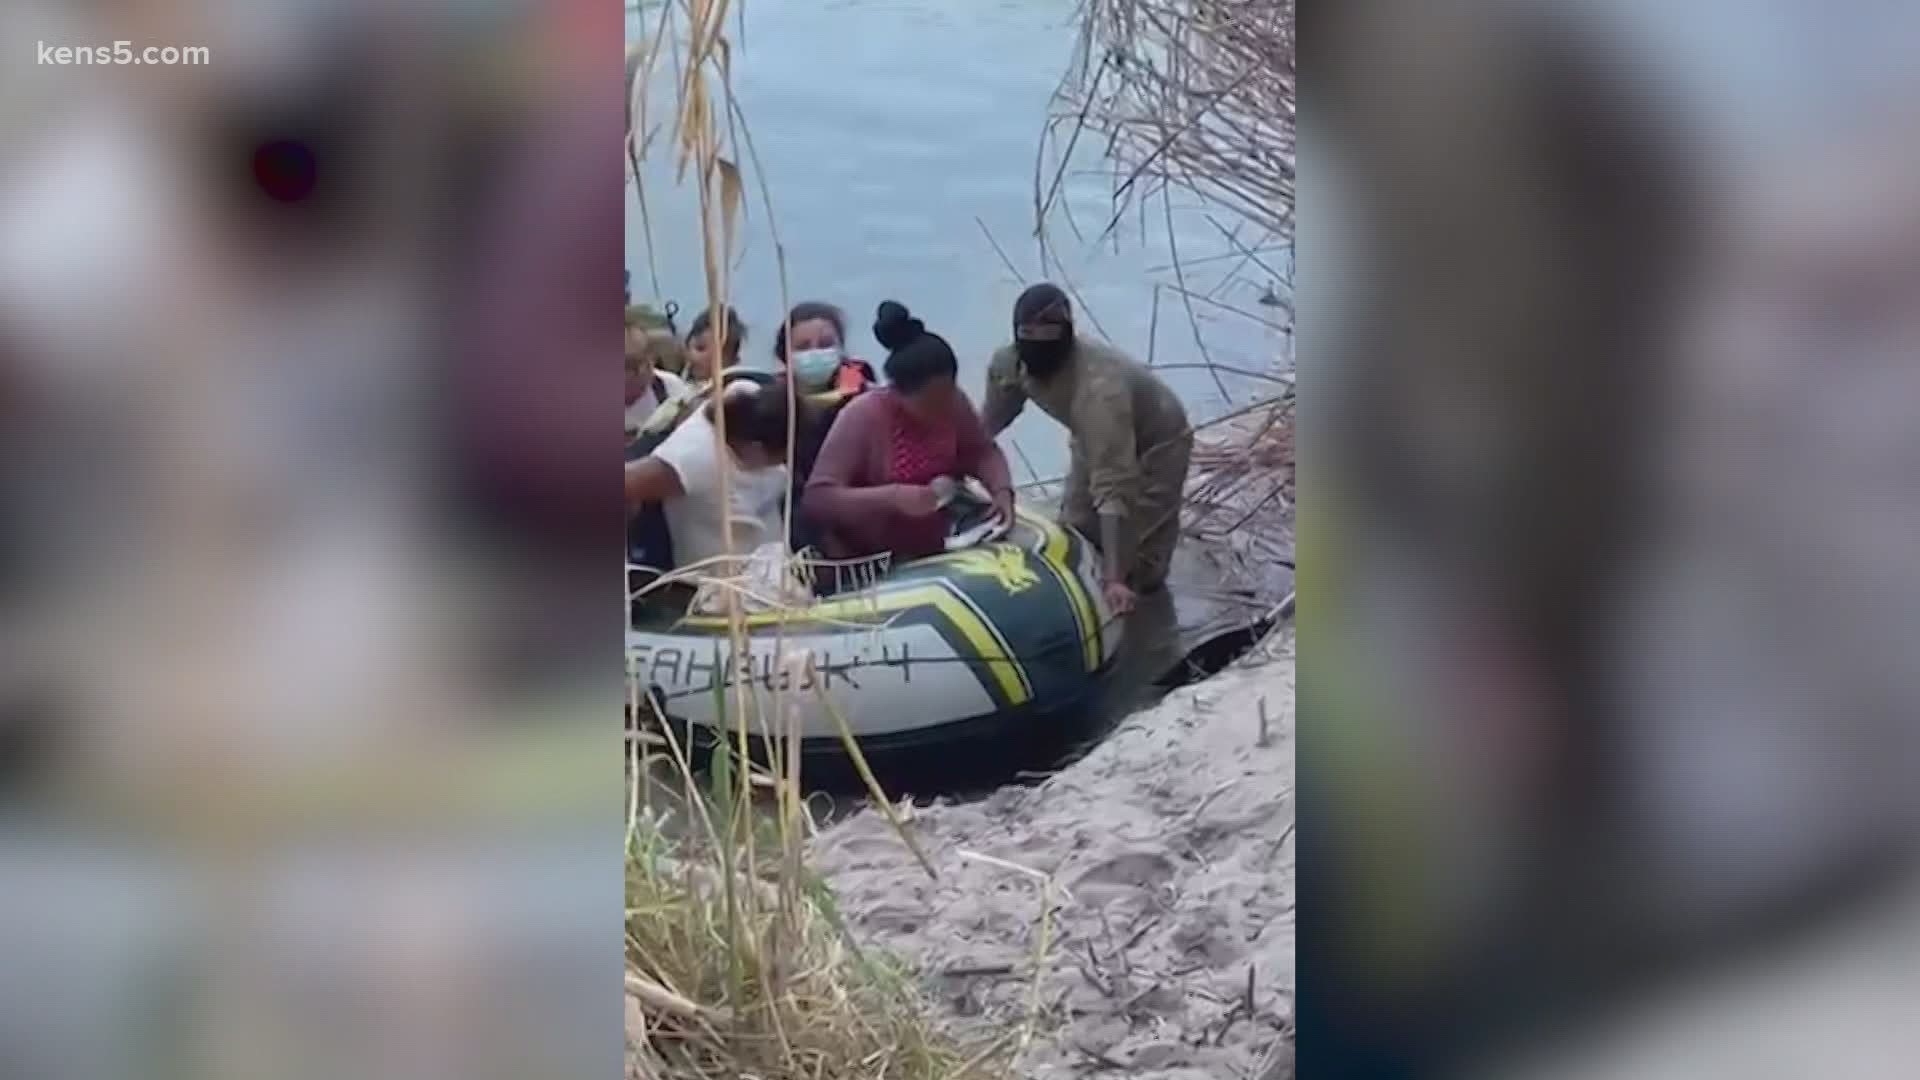 It's nearly three hours from the border, but officials in Goliad County say the cartels are using ranch lands to run massive human smuggling rings.